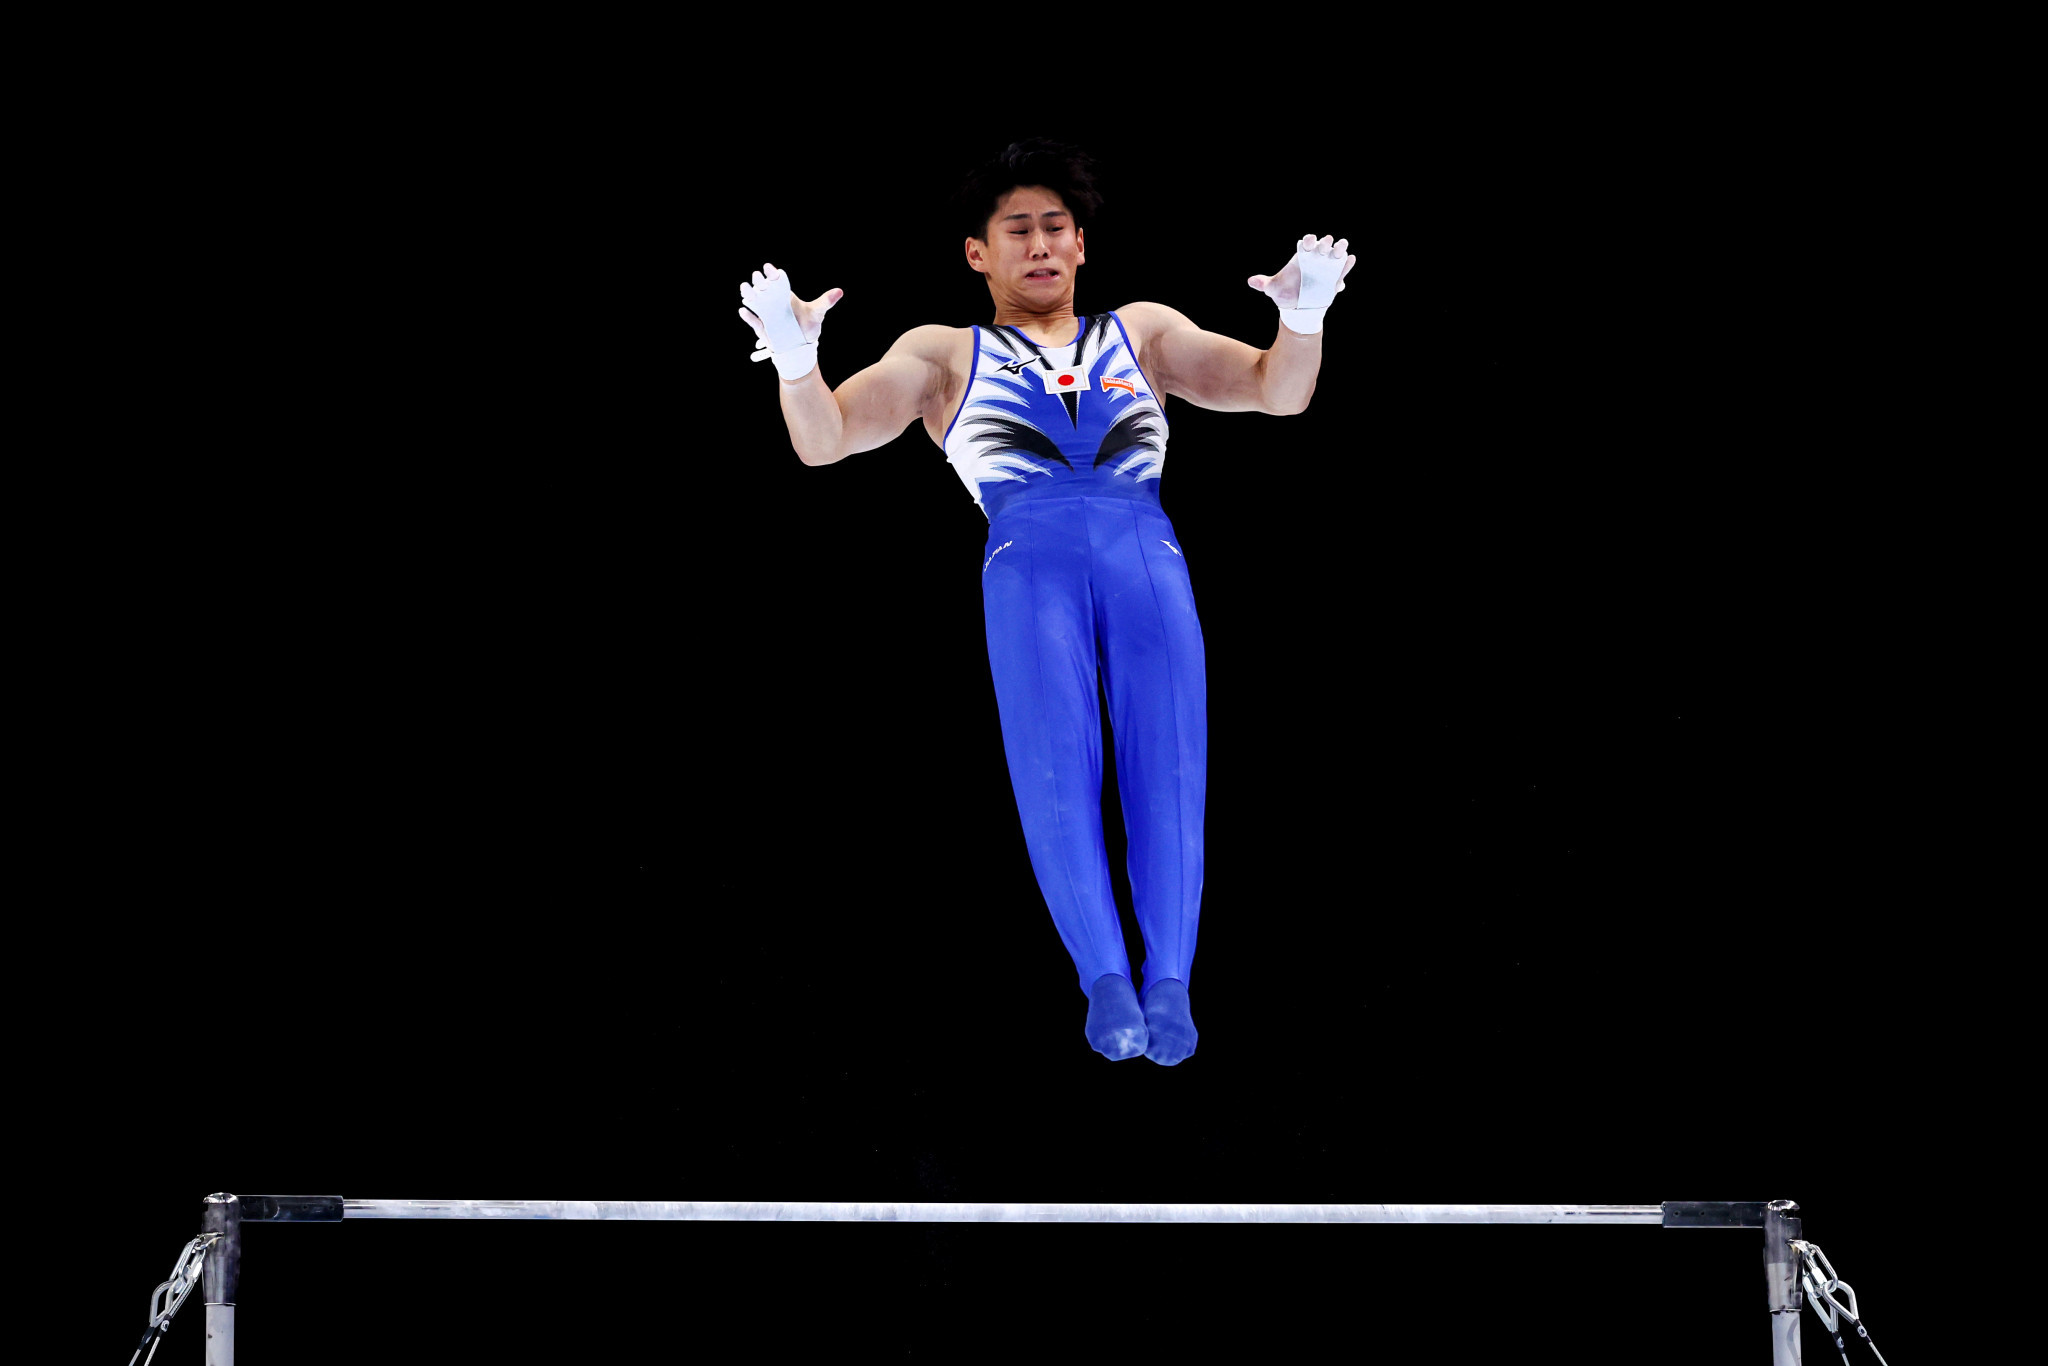 Hashimoto defends men's all-around title at FIG Artistic Gymnastics World Championships